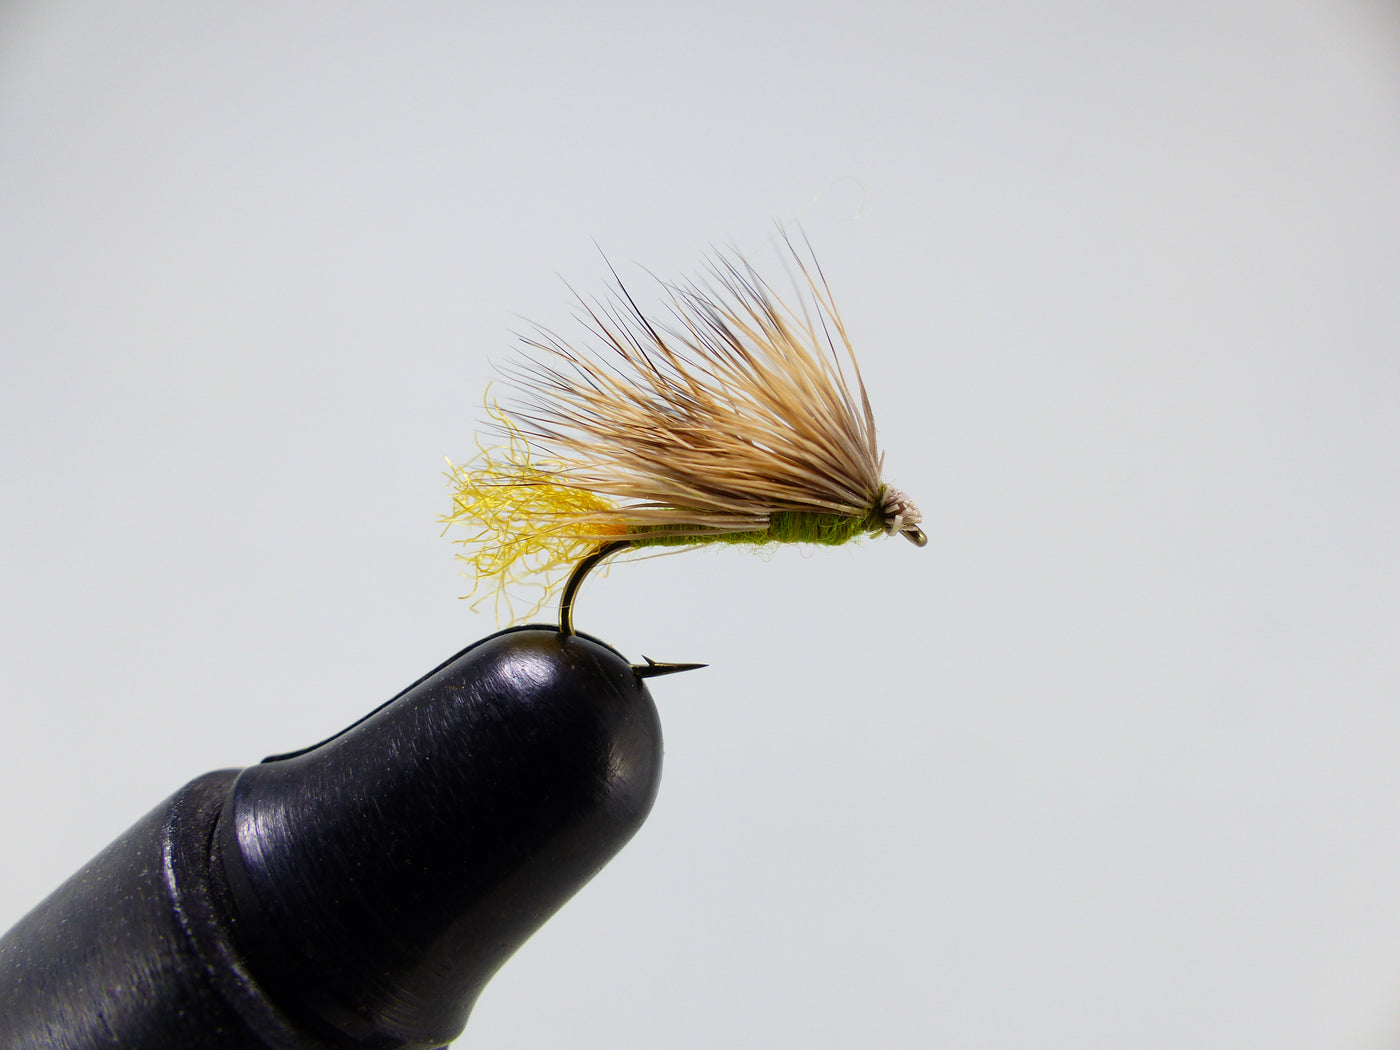 Galloup's Double Wing Caddis olive